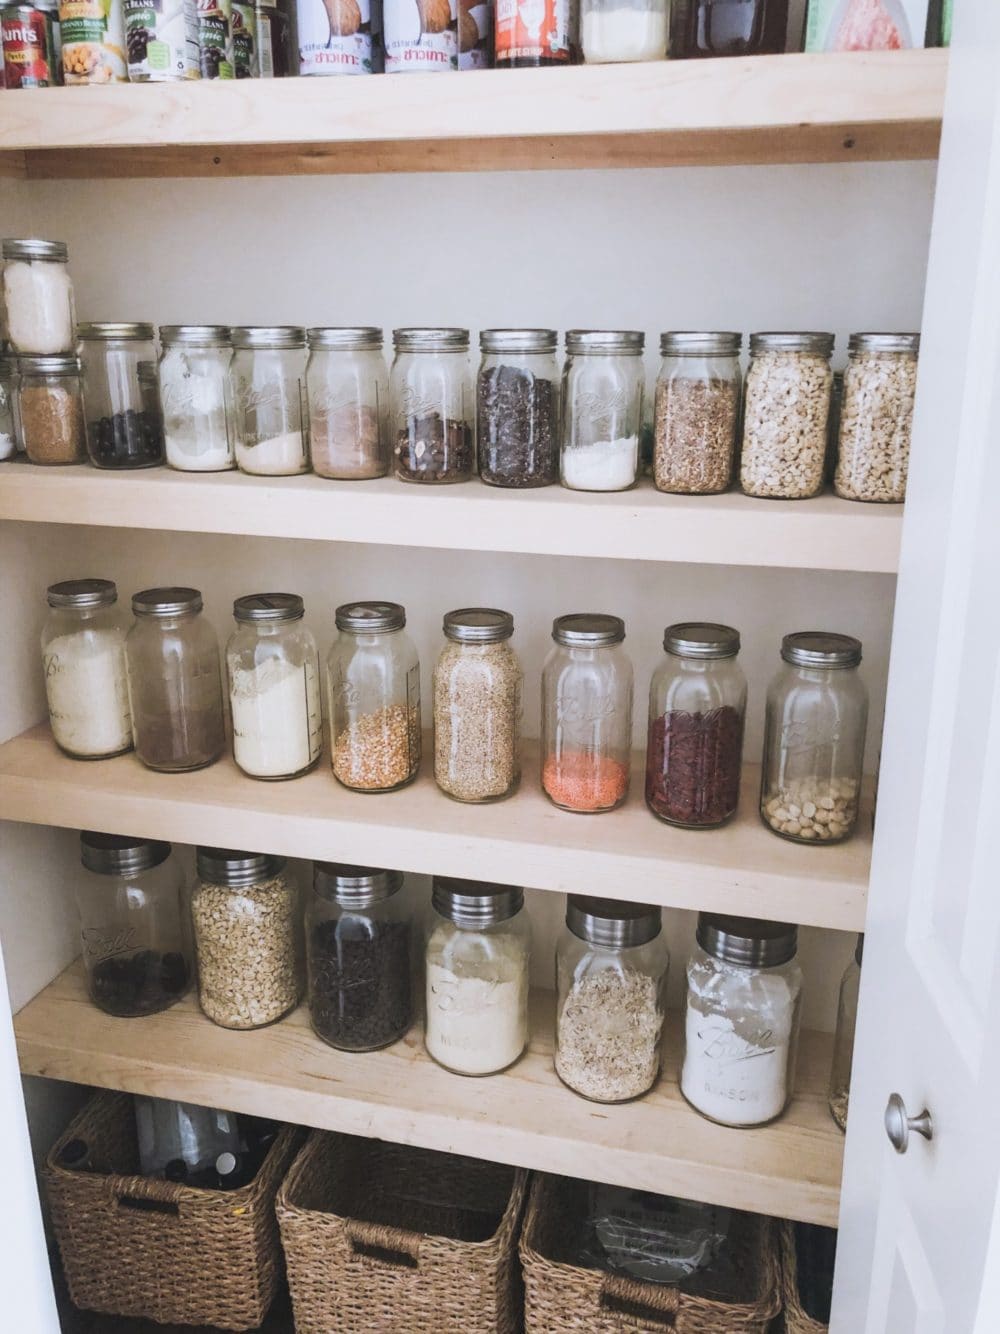 https://mindfulofthehome.com/wp-content/uploads/2021/11/organized-pantry-with-jars-1000x1334.jpg